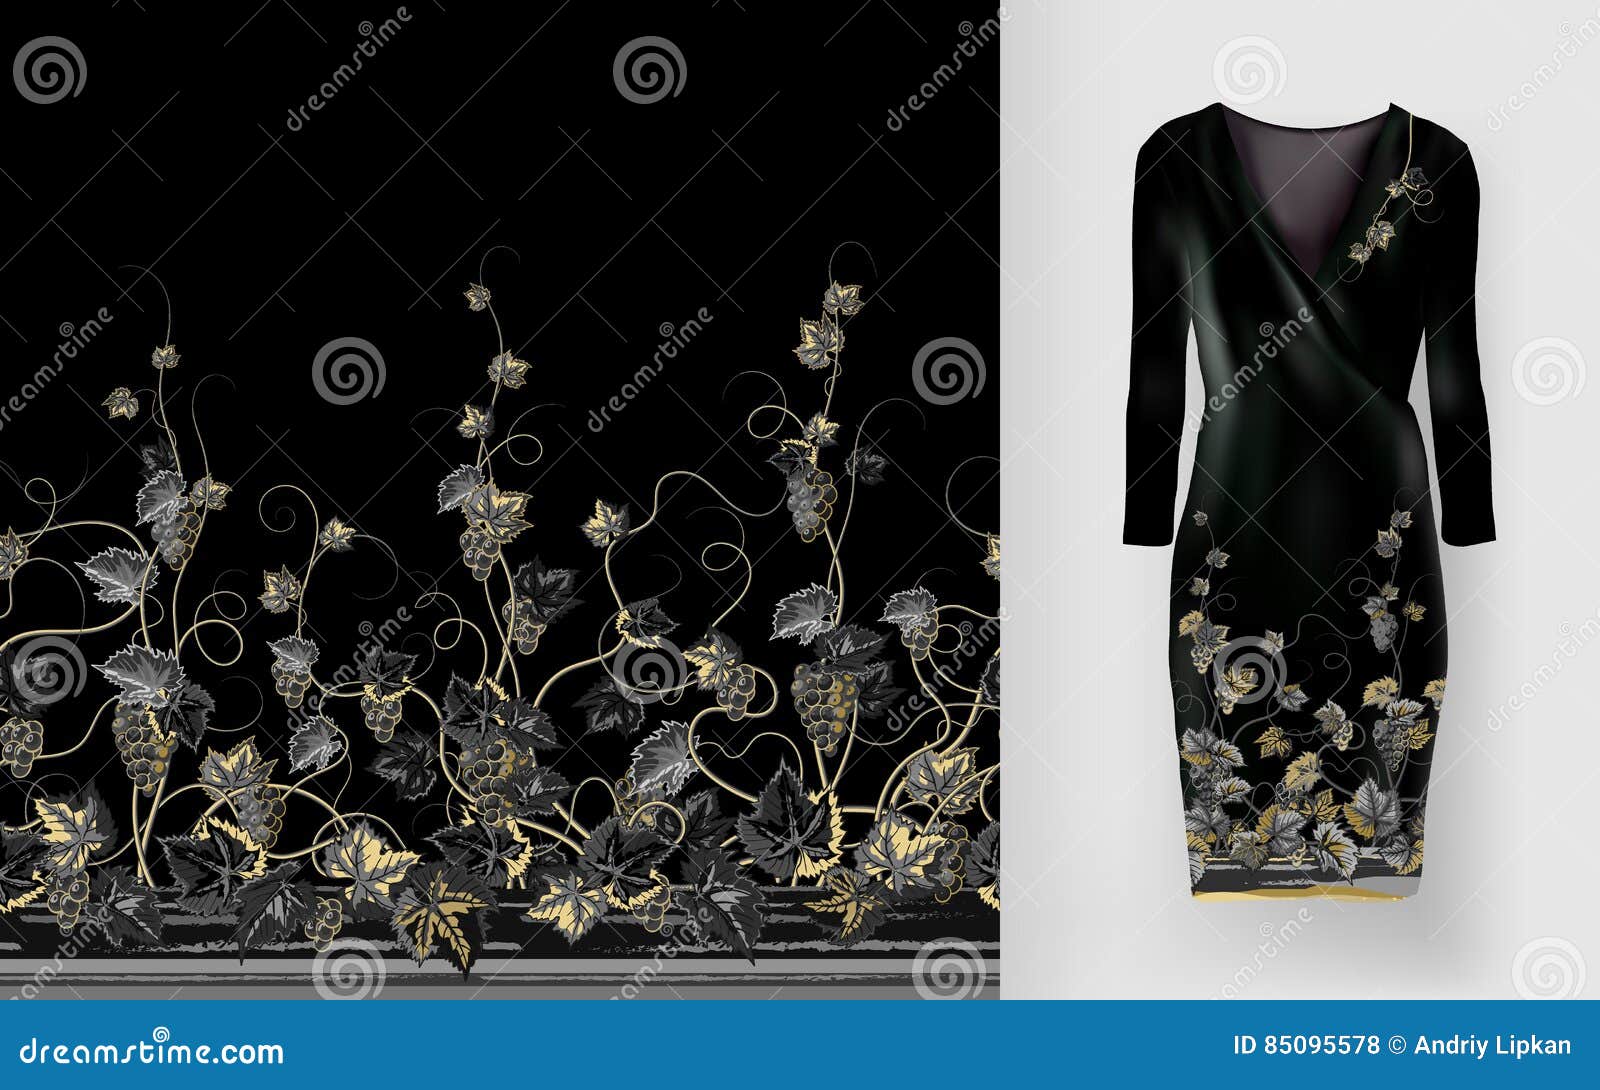 Download Vector Pattern Of Vines With Leaves And Berries On Classic ...